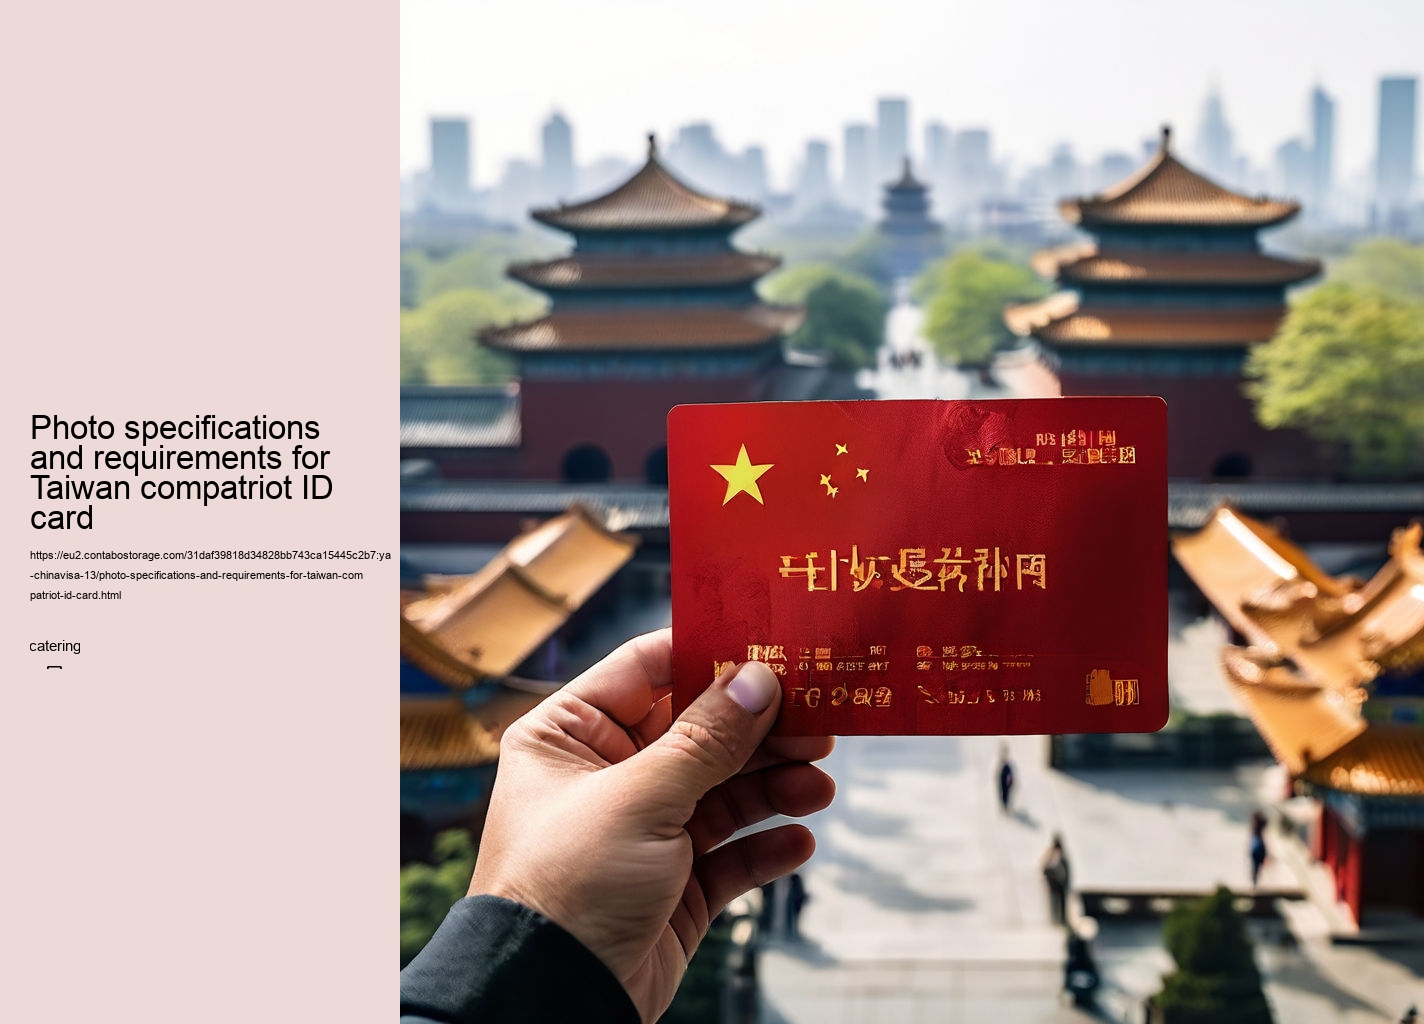 Photo specifications and requirements for Taiwan compatriot ID card